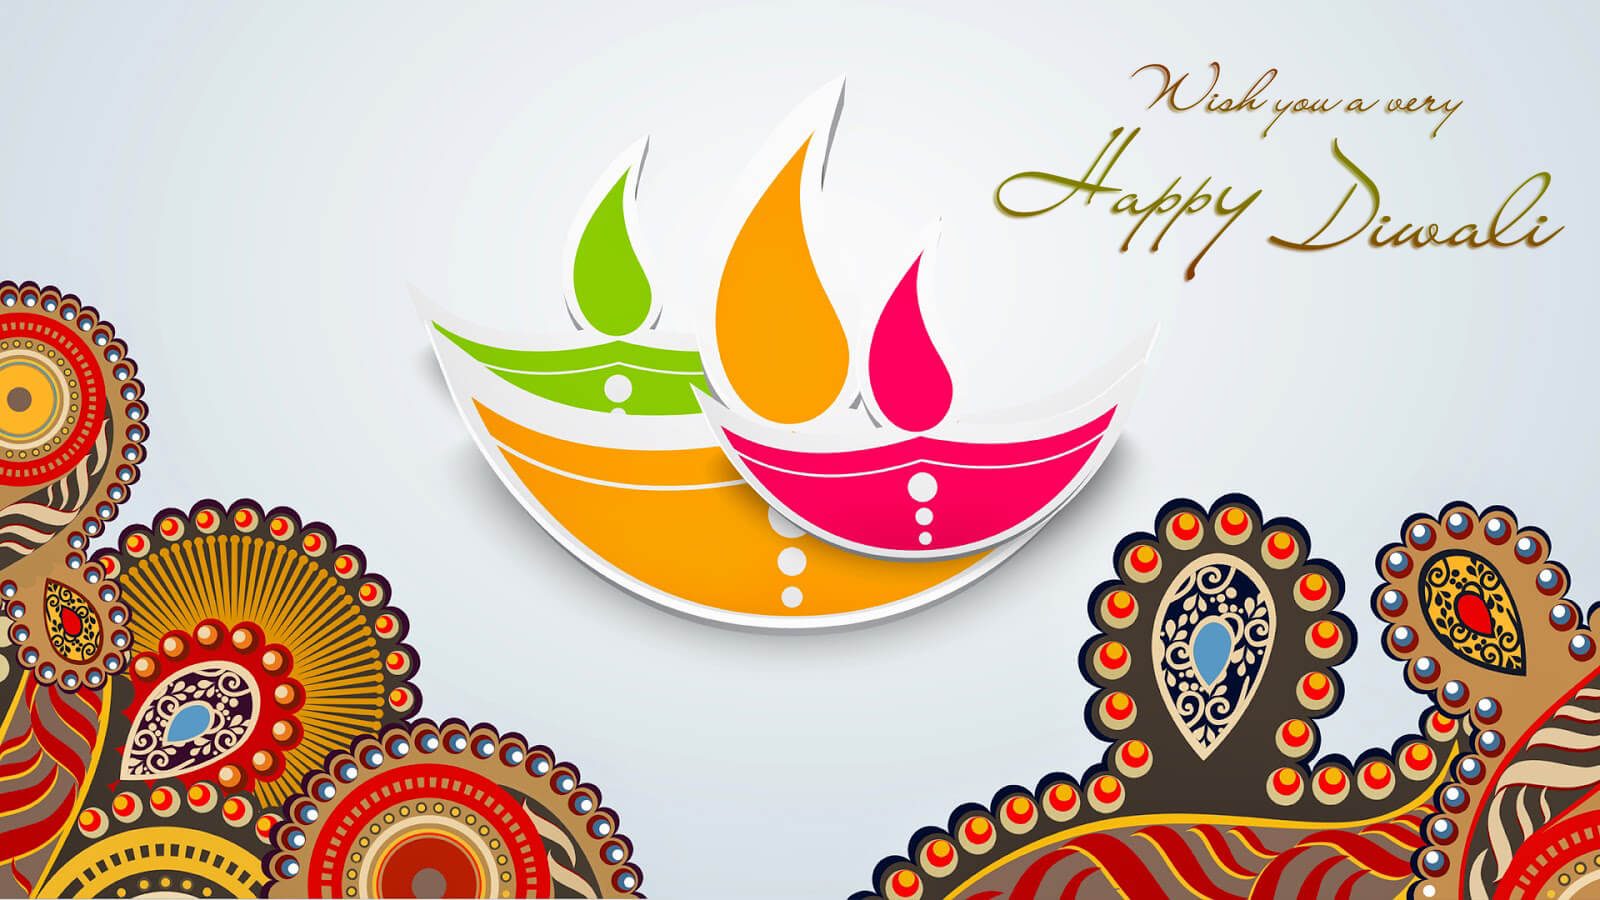 30+ A Beautiful Collection of Diwali Wallpapers & Greetings Cards | CGfrog